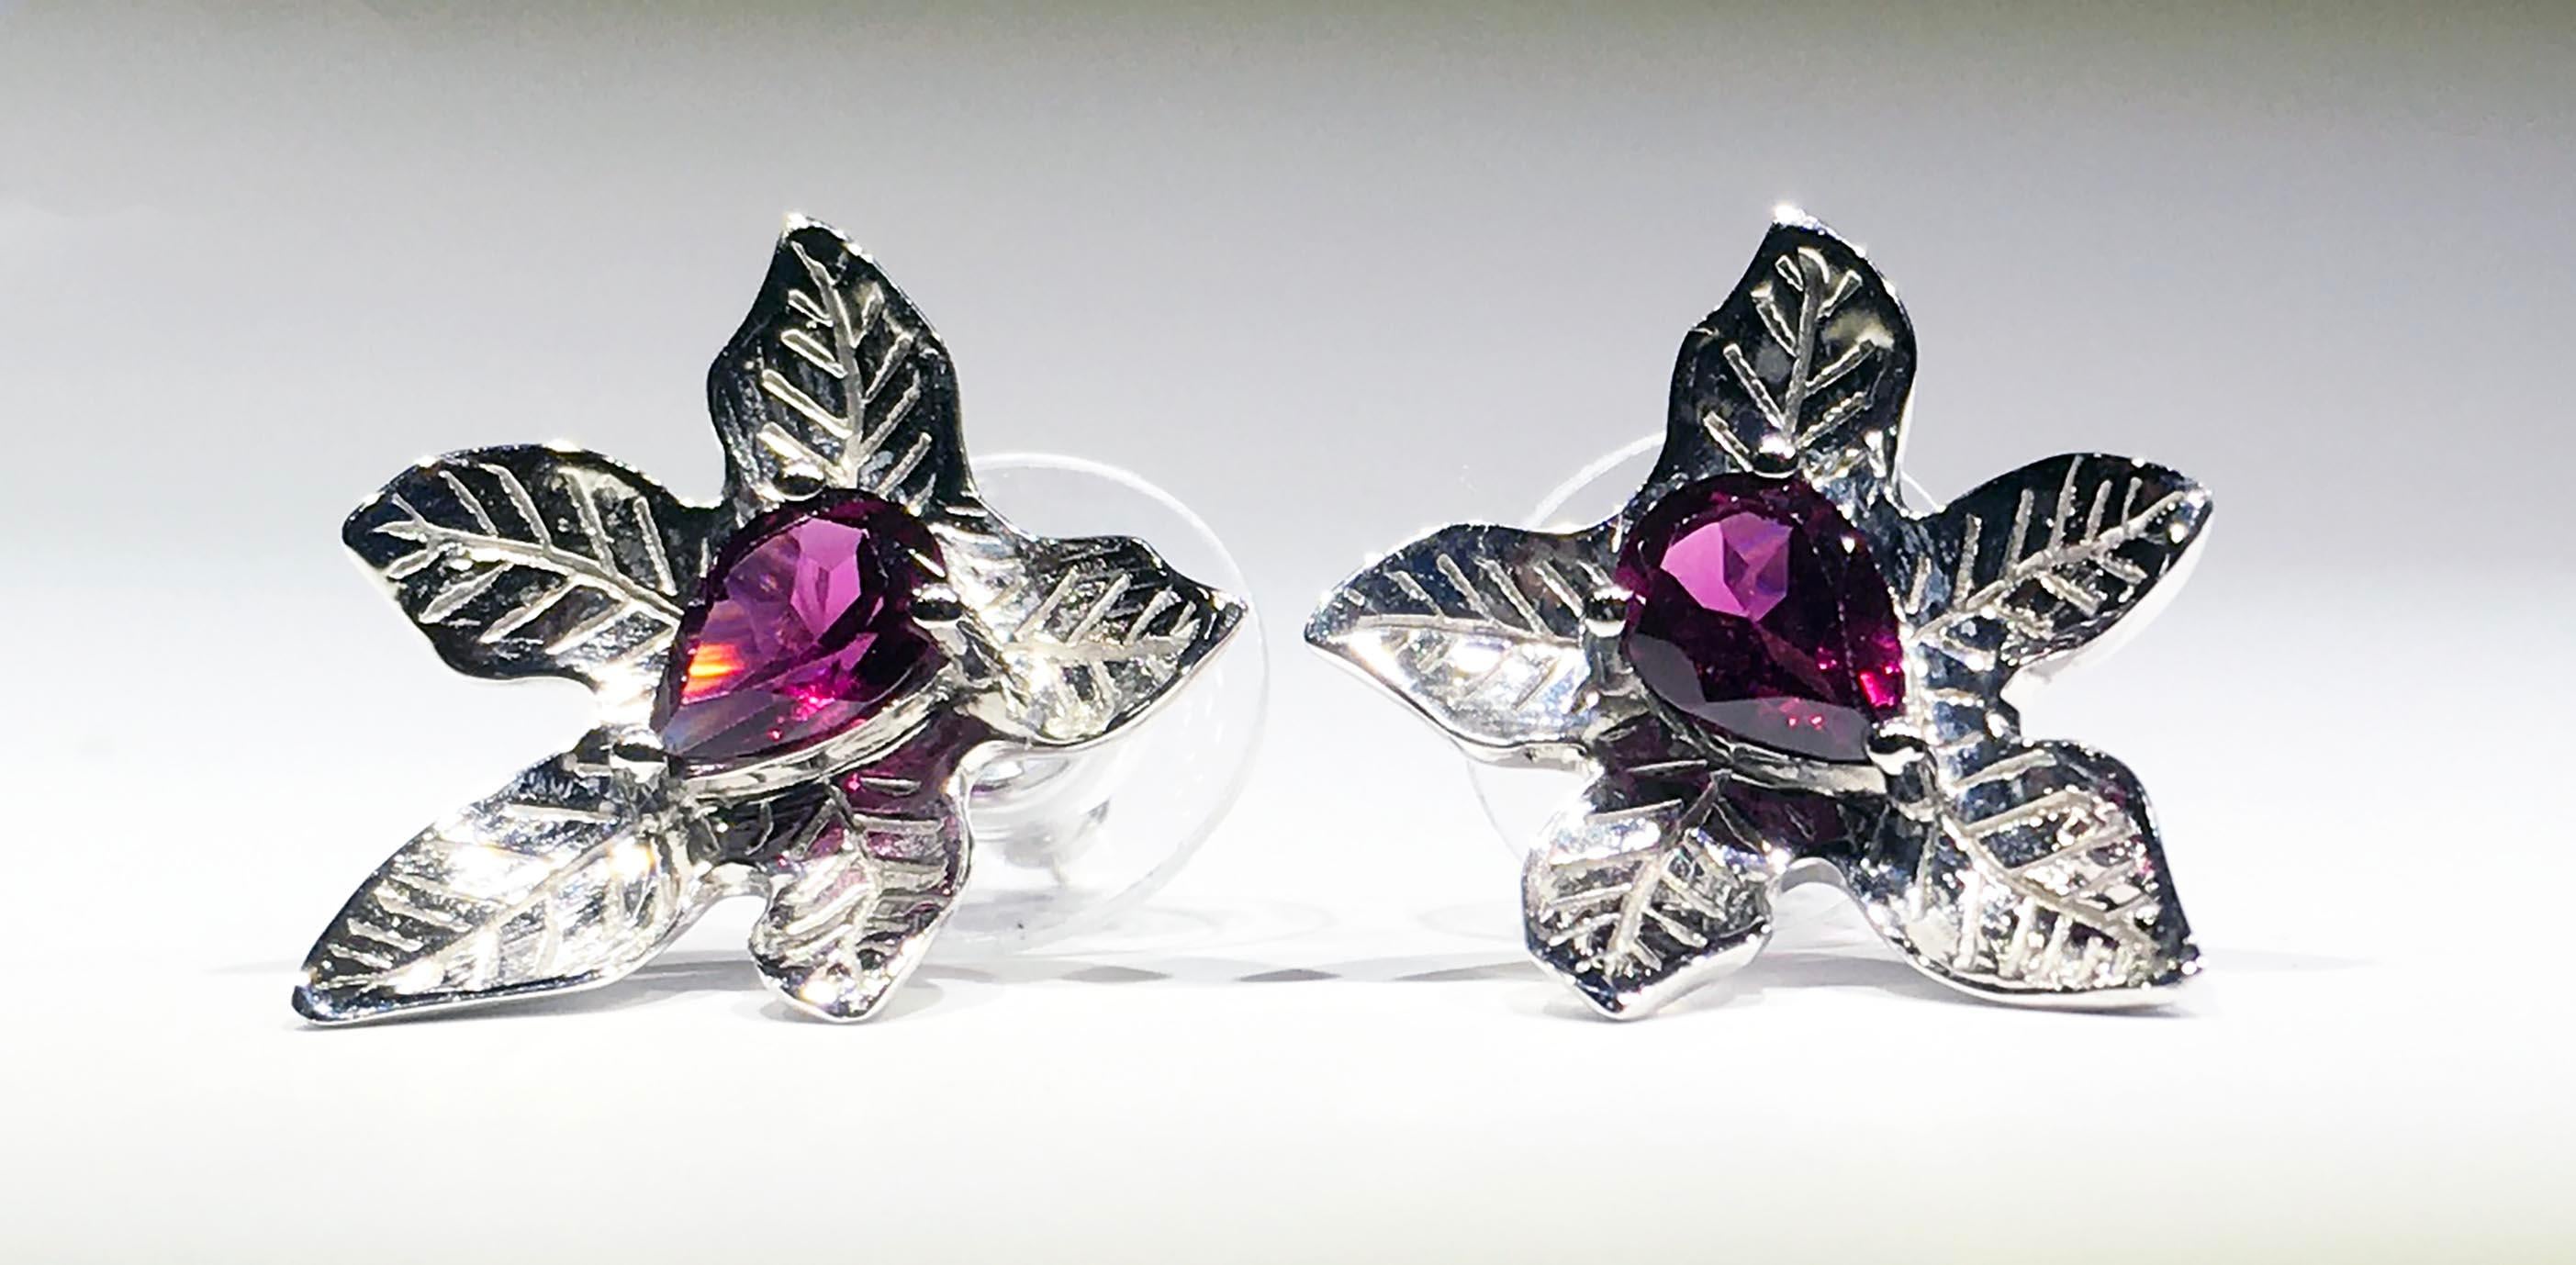 A lovely pair of Silver Leaf Stud Earrings set with Pear Shaped Rhodolite Garnets TW 1.6 Carats. These Earrings are Plated with Rhodium for that nice White Shine. 

Originally from San Diego, California, Kary Adam lived in the “Gem Capital of the